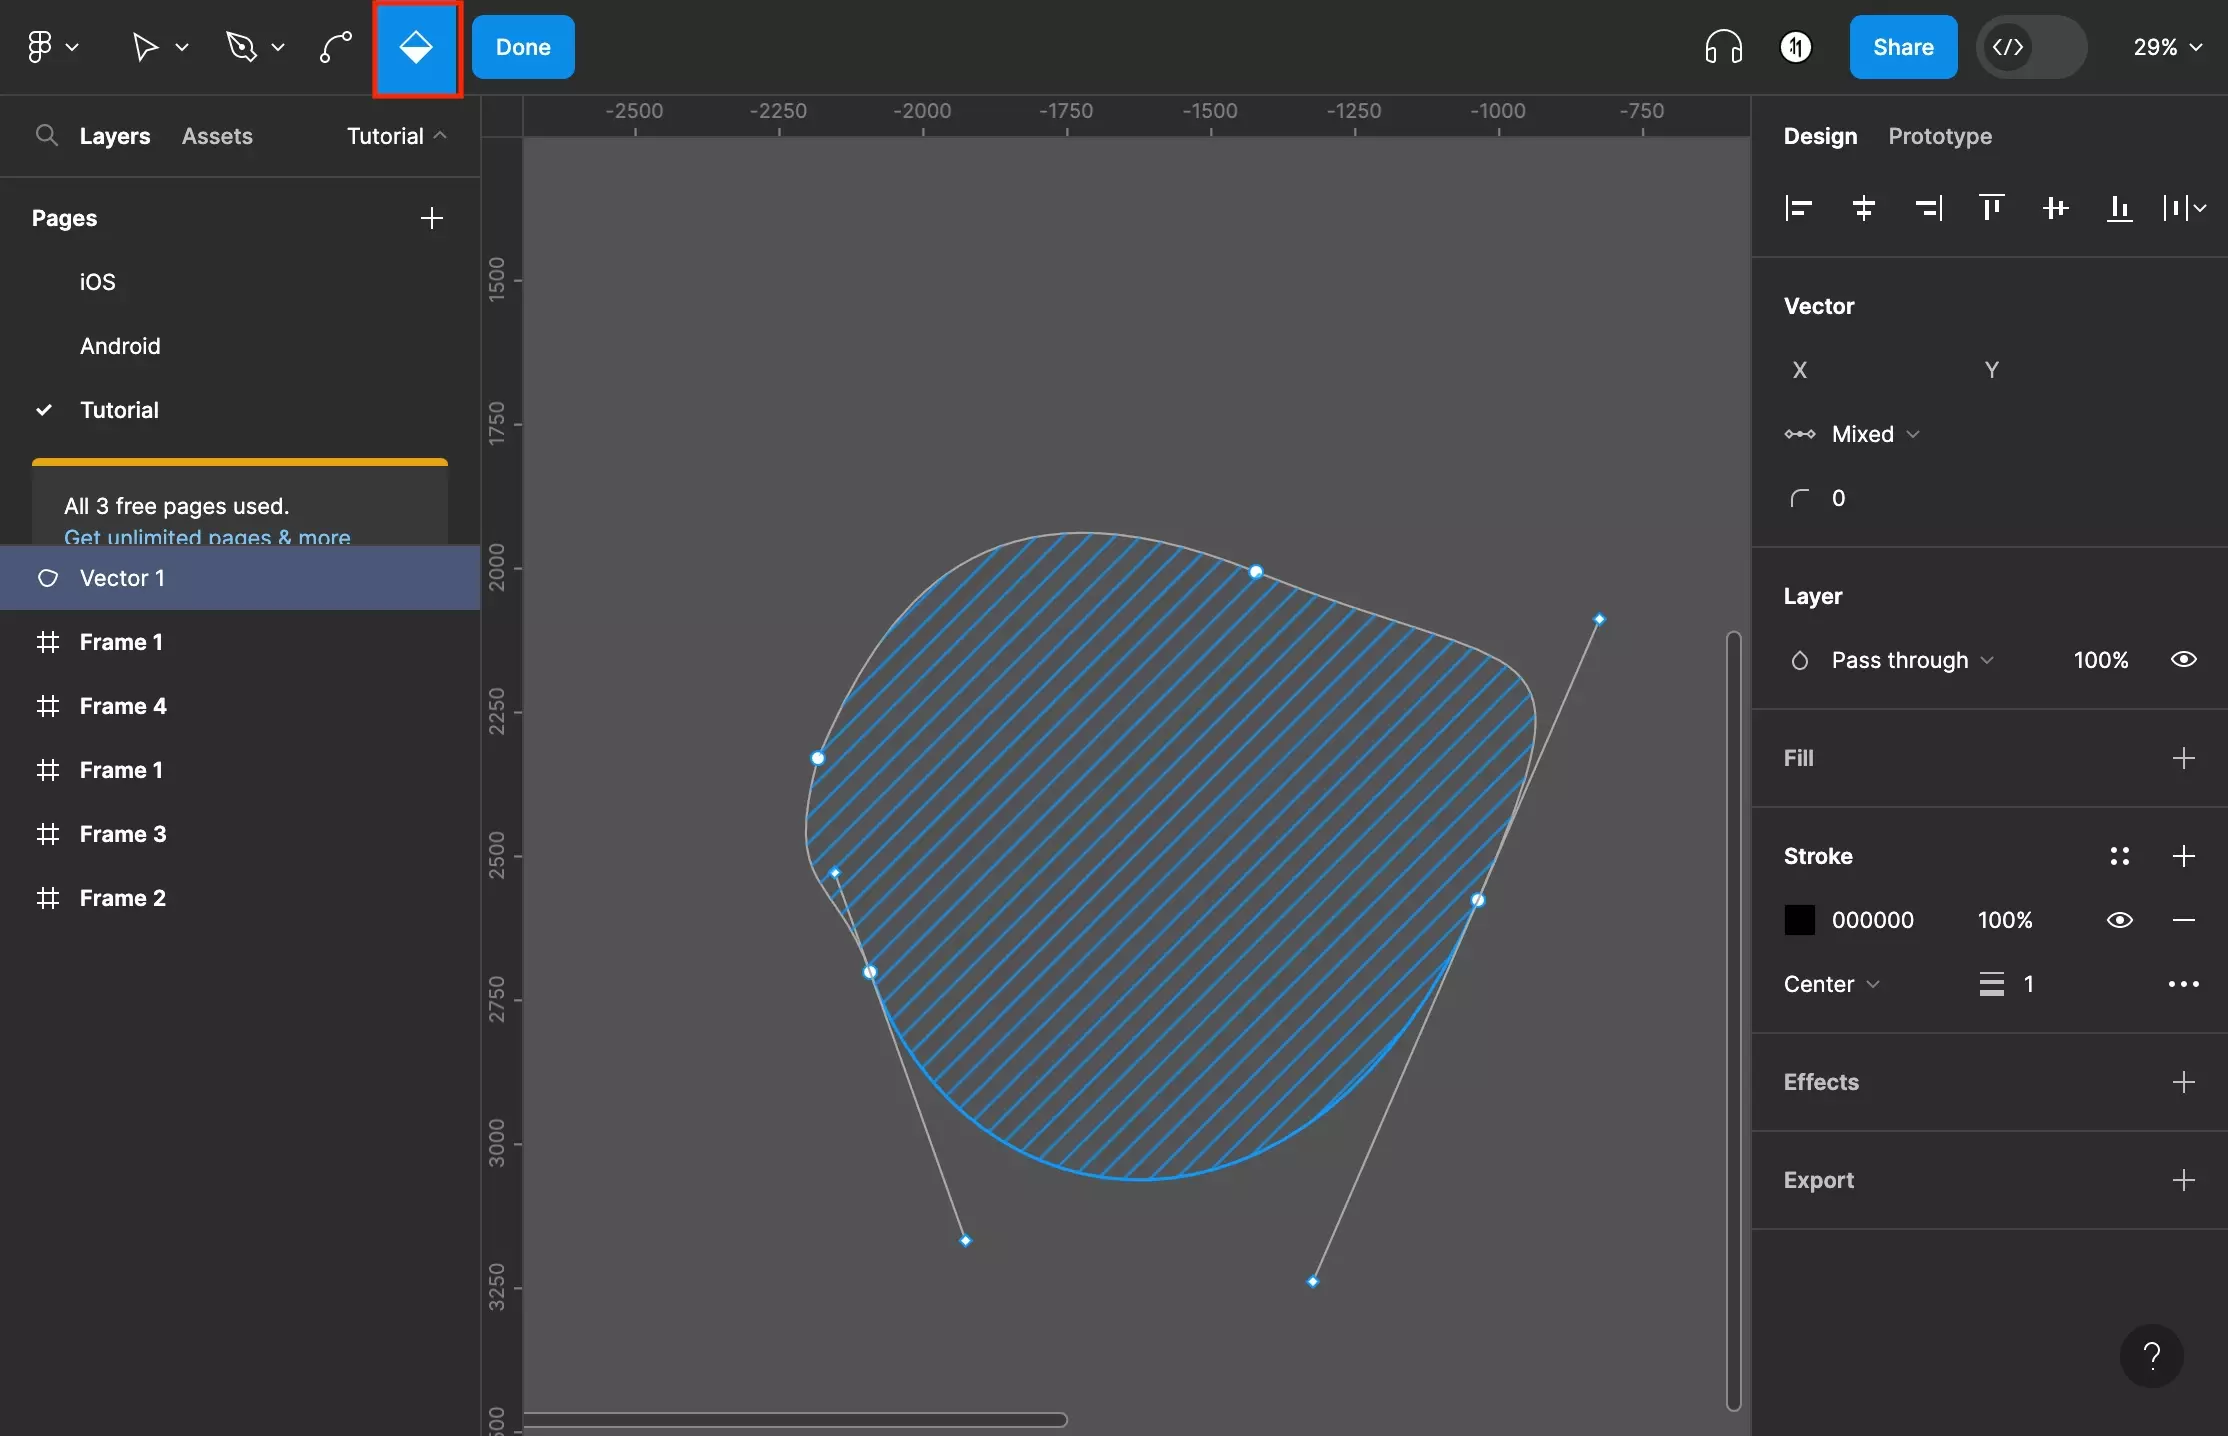 A screenshot of Figma showing a shape drawn using the pen tool. The interior of the shape has a pattern, which appears when you select the paint bucket tool and hover your mouse over a shape. To activate the paint bucket tool, select it on the top menu bar or press the B key on your keyboard.